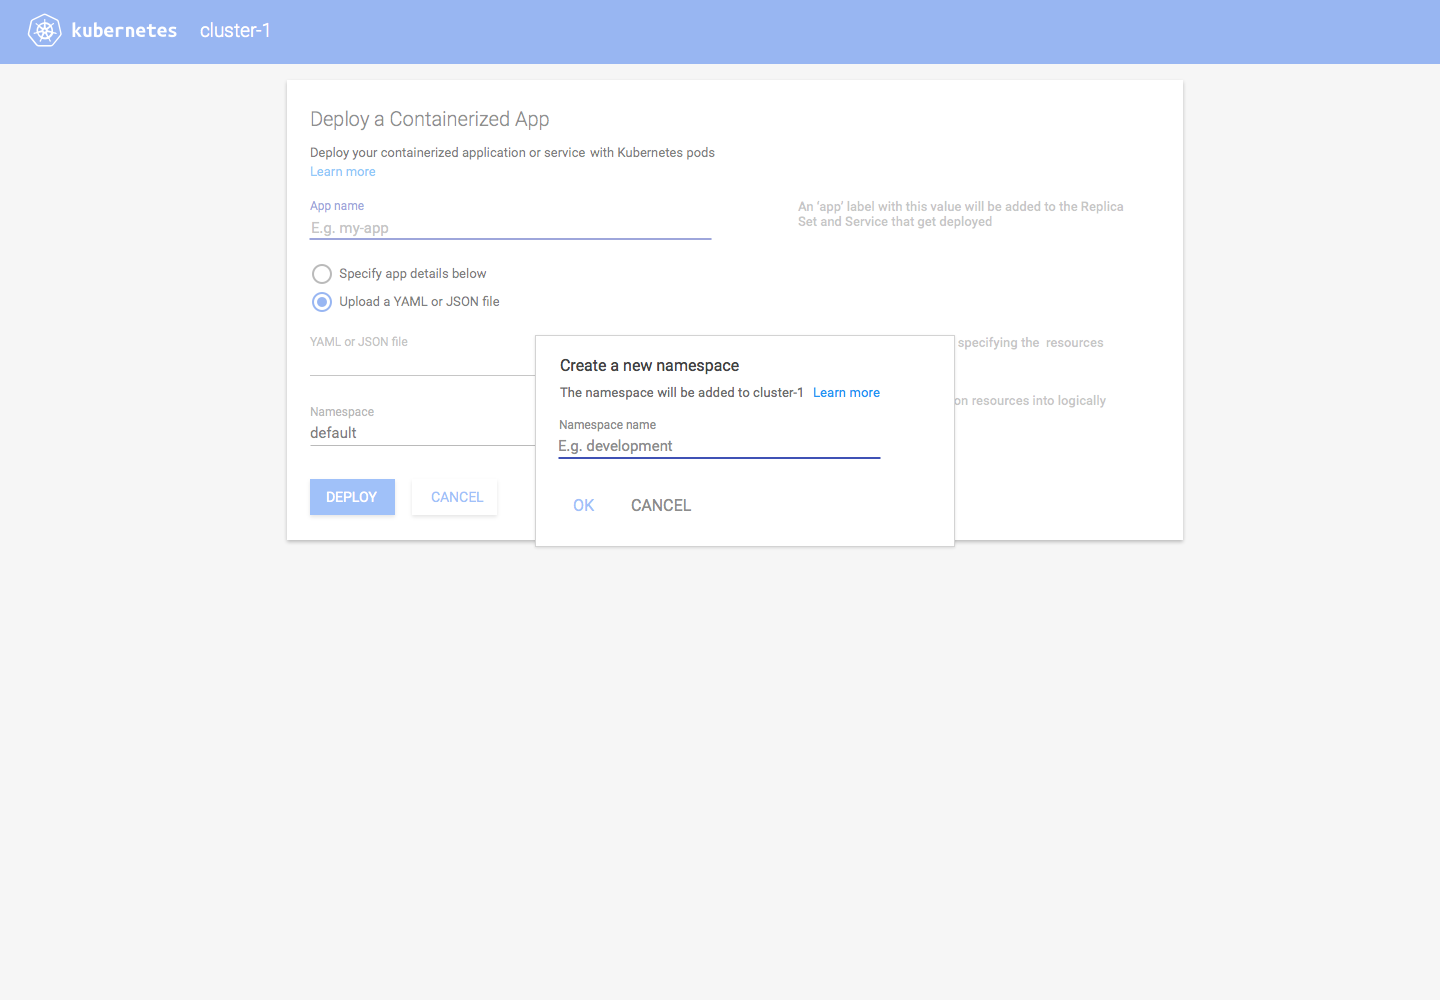 designs/11-11-2015/05_deploy form new namespace dialog.png